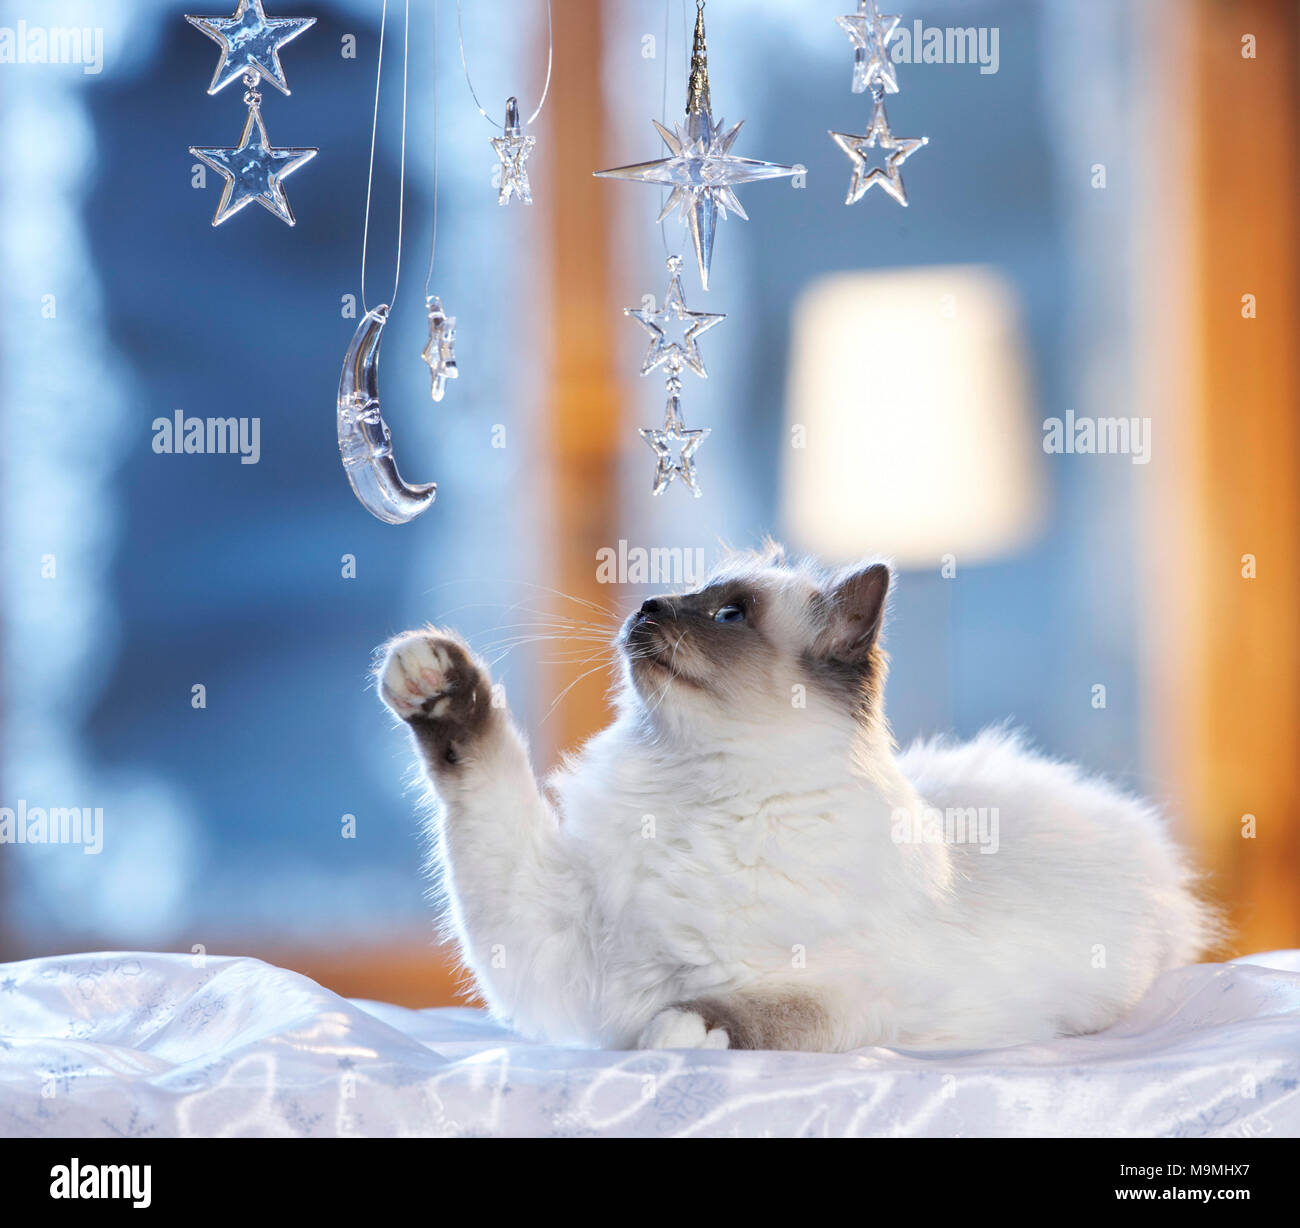 Christmas: Sacred cat of Burma playing with moon and stars made of glass in a festive decorated window. Germany Stock Photo